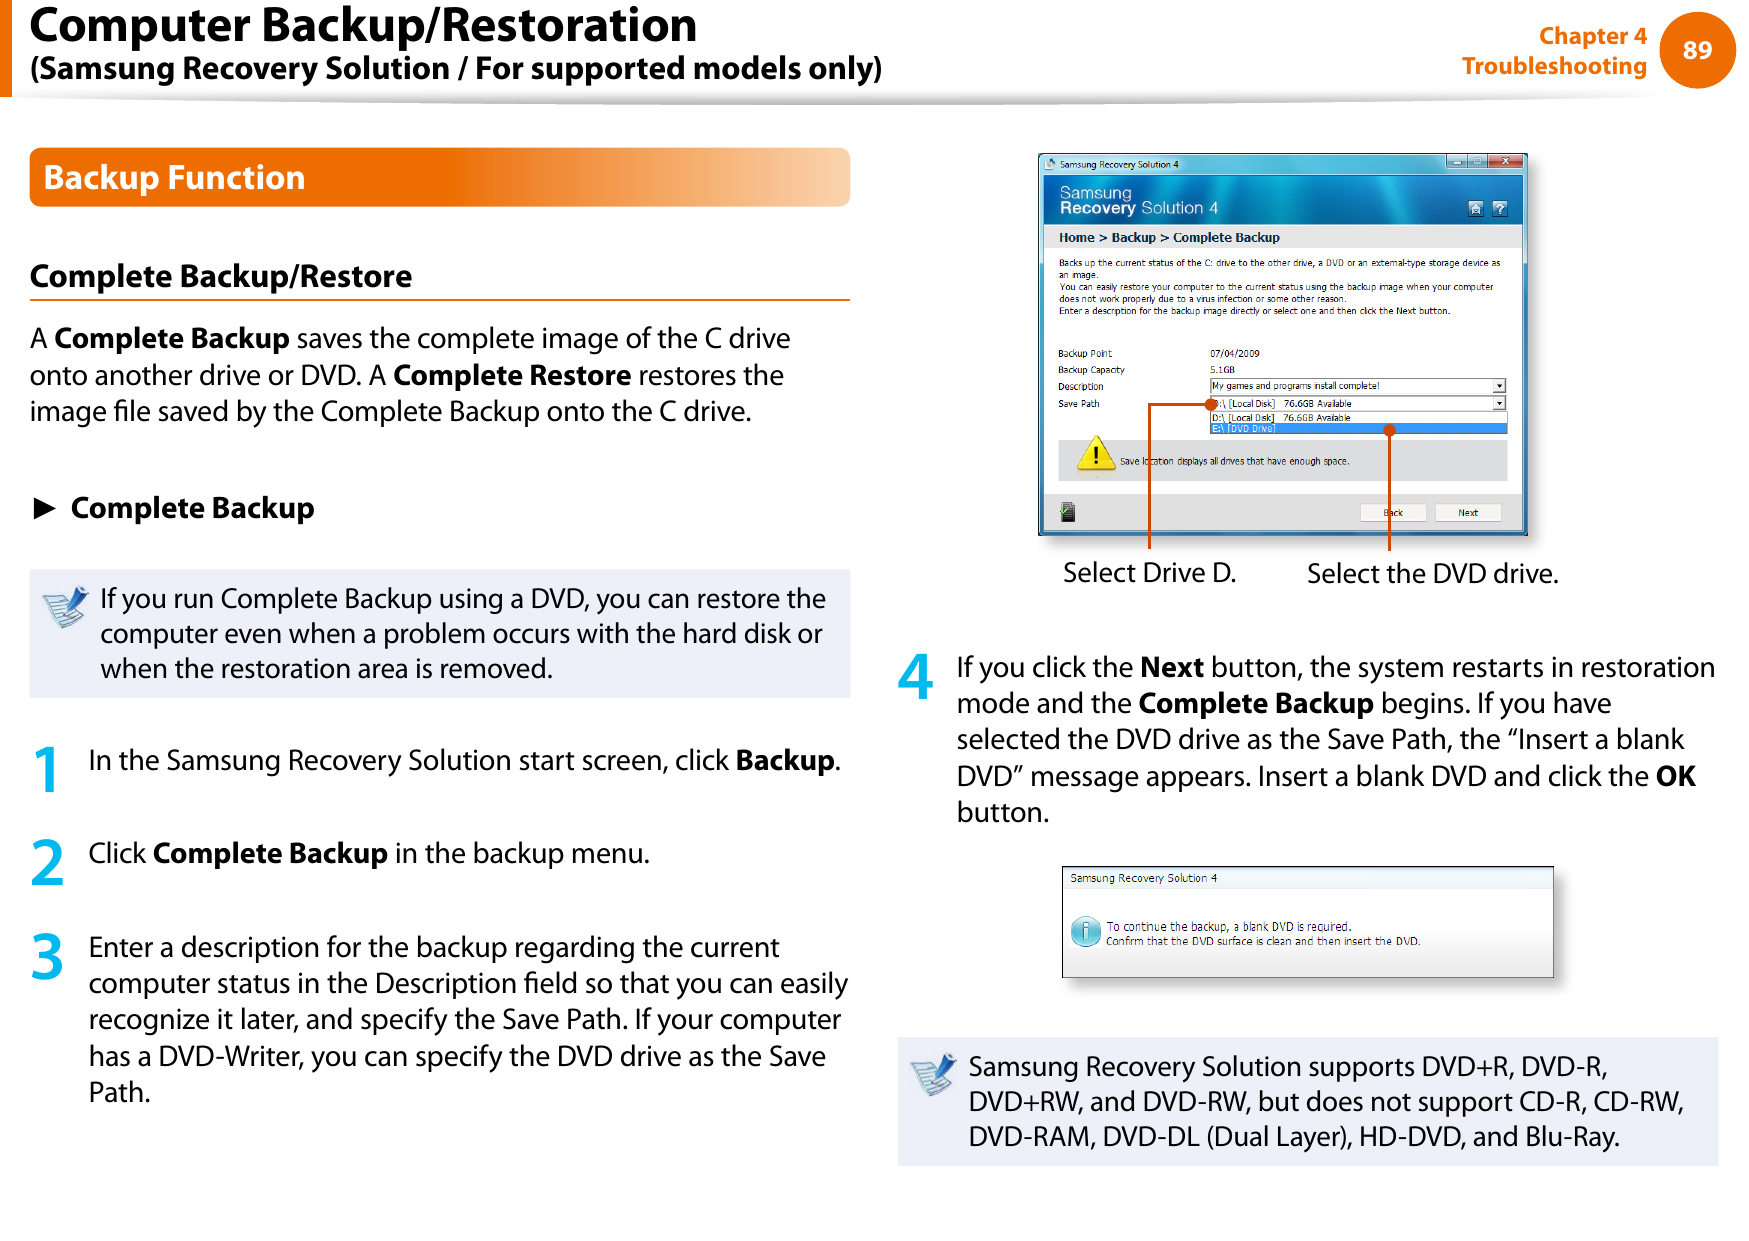 8889Chapter 4 TroubleshootingBackup FunctionComplete Backup/RestoreA Complete Backup saves the complete image of the C drive onto another drive or DVD. A Complete Restore restores the image le saved by the Complete Backup onto the C drive.► Complete BackupIf you run Complete Backup using a DVD, you can restore the computer even when a problem occurs with the hard disk or when the restoration area is removed.1  In the Samsung Recovery Solution start screen, click Backup.2  Click Complete Backup in the backup menu.3  Enter a description for the backup regarding the current computer status in the Description eld so that you can easily recognize it later, and specify the Save Path. If your computer has a DVD-Writer, you can specify the DVD drive as the Save Path.Select Drive D. Select the DVD drive.4  If you click the Next button, the system restarts in restoration mode and the Complete Backup begins. If you have selected the DVD drive as the Save Path, the “Insert a blank DVD” message appears. Insert a blank DVD and click the OK button.Samsung Recovery Solution supports DVD+R, DVD-R, DVD+RW, and DVD-RW, but does not support CD-R, CD-RW, DVD-RAM, DVD-DL (Dual Layer), HD-DVD, and Blu-Ray.Computer Backup/Restoration  (Samsung Recovery Solution / For supported models only)